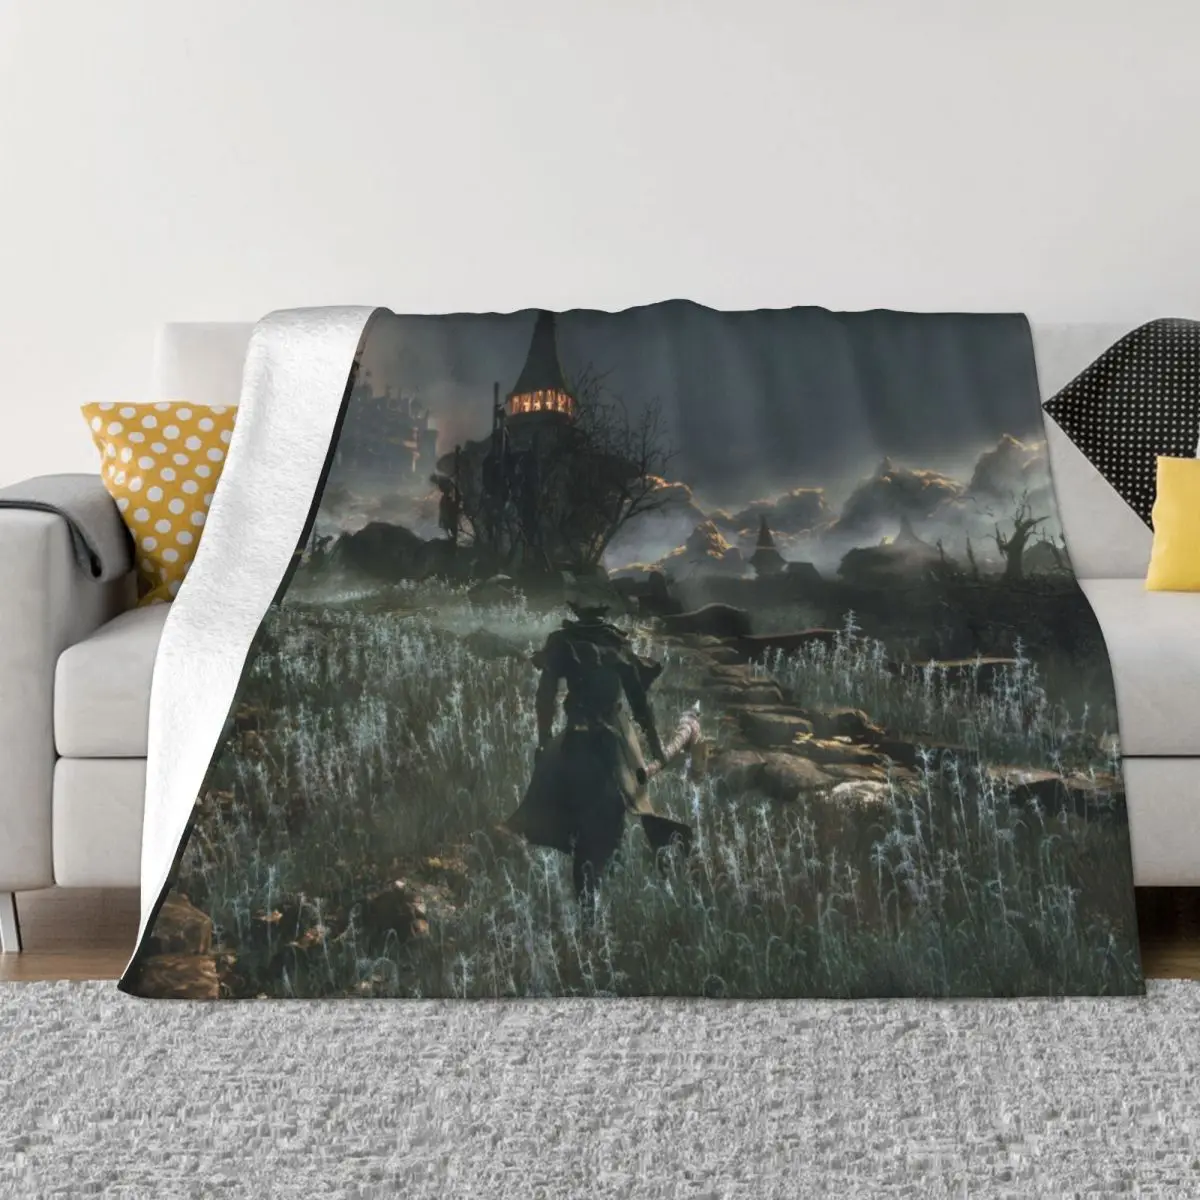 

Bloodborne Horror Game Flannel Throw Blanket The Old Hunters Blankets for Sofa Couch Ultra-Soft Bedroom Quilt